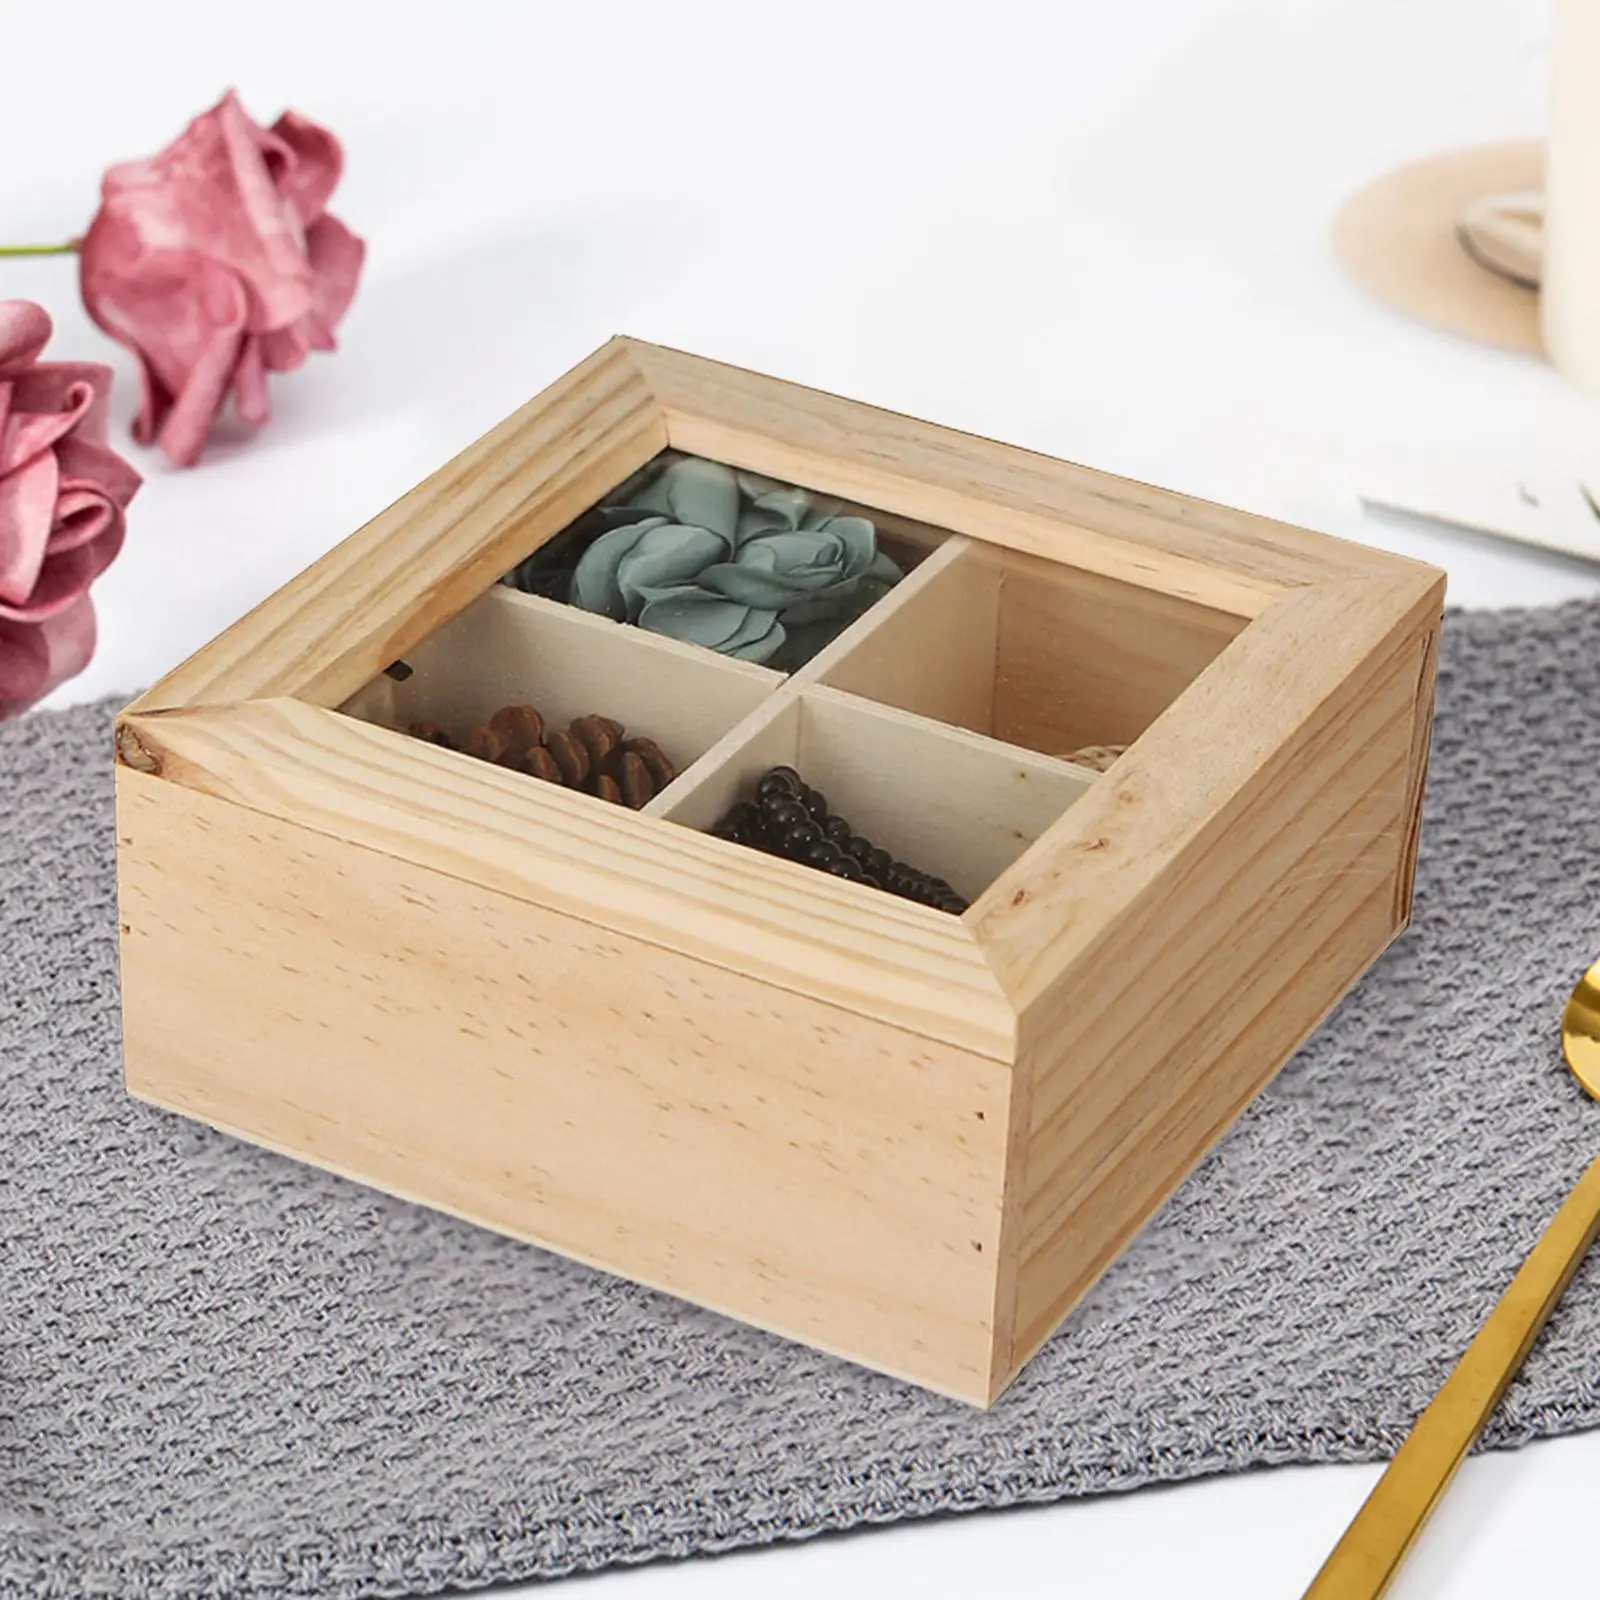 Wood Storage Box Jewelry Display Case with Glass Cover Decorative Box Organizer for Bracelets Gadgets Jewelry Earrings Necklaces